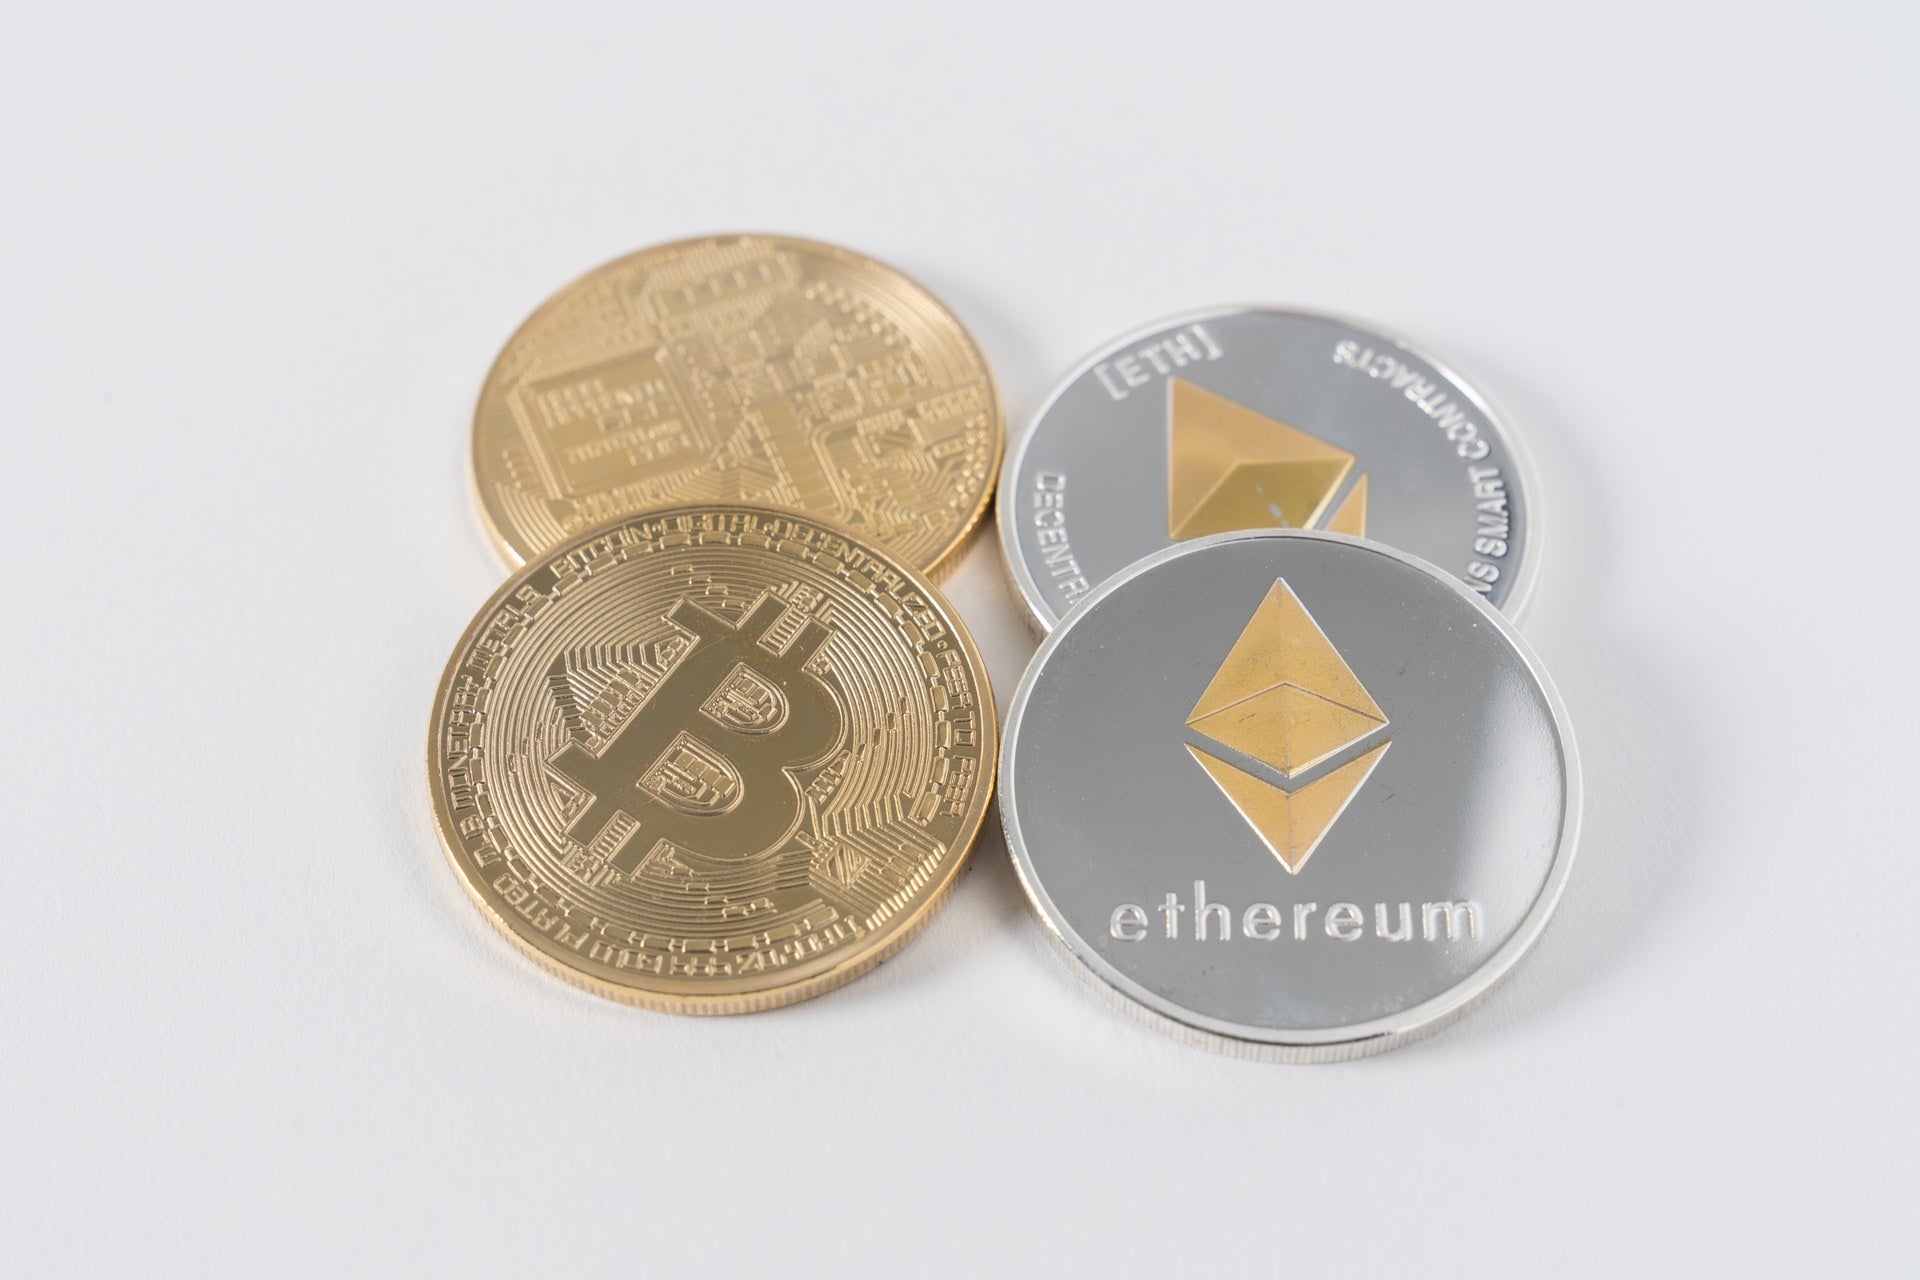 Ethereum price today, ETH to USD live, marketcap and chart | CoinMarketCap